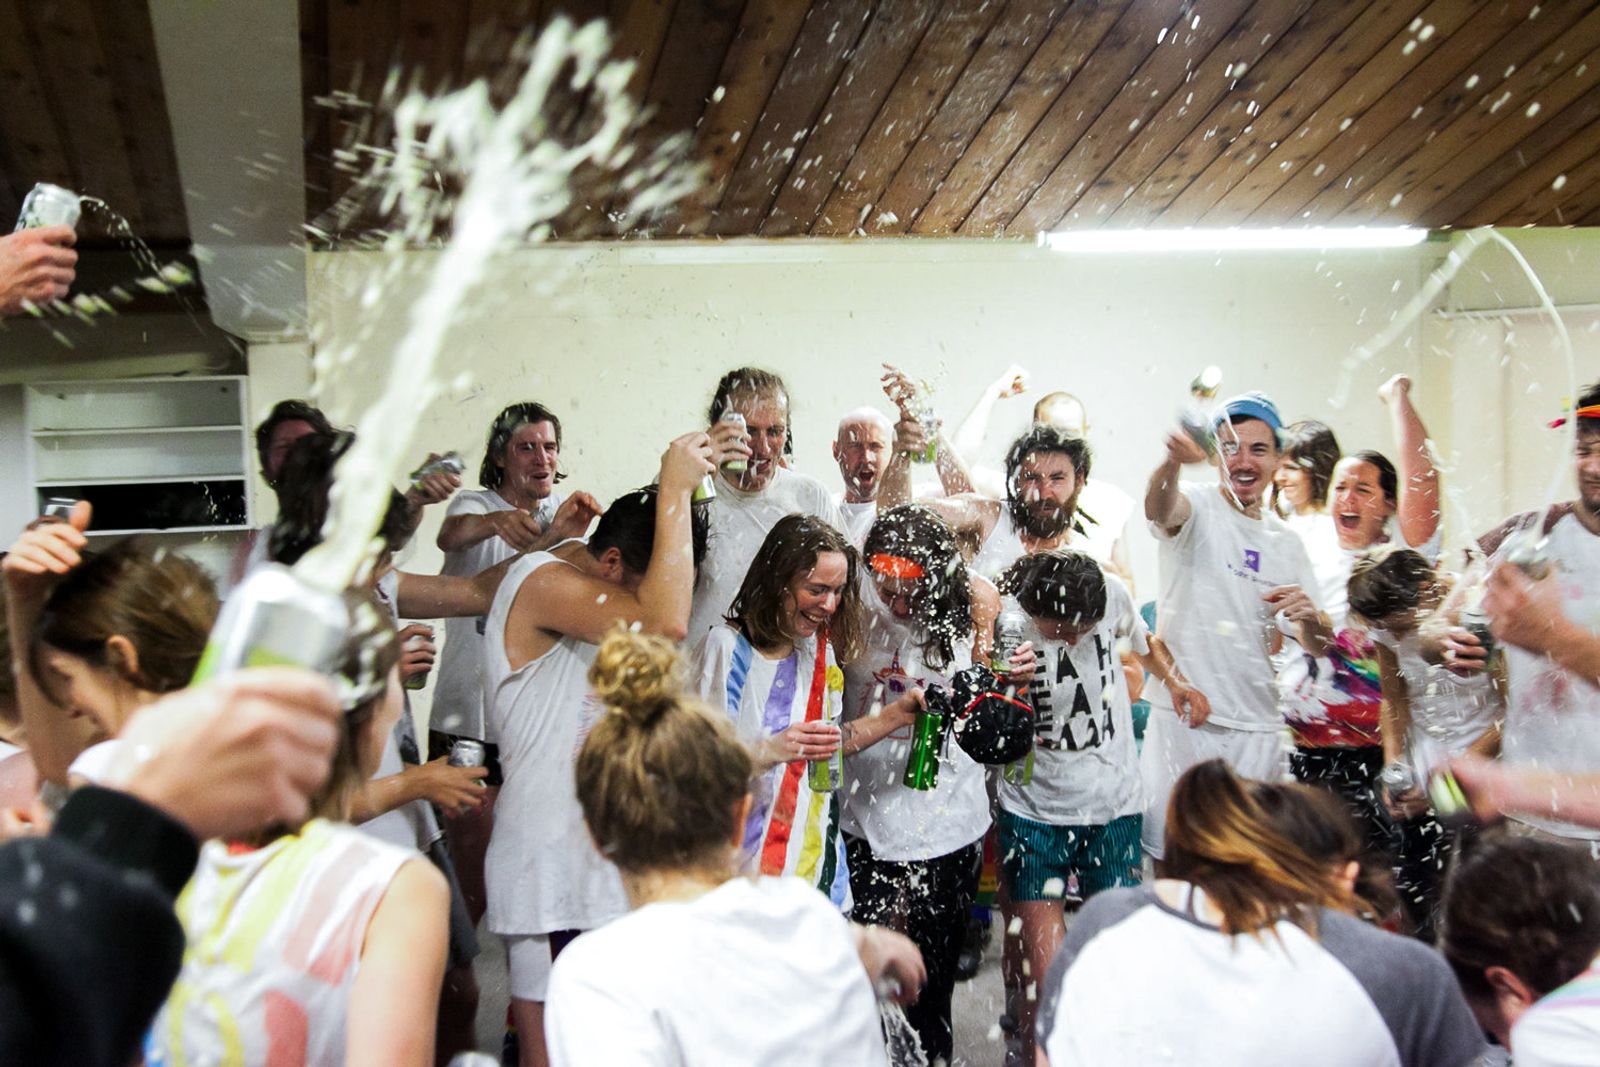 © J Forsyth - The Unicorns celebrate (the usual) lose by singing their song and having a 'beer shower' in the change rooms after the game